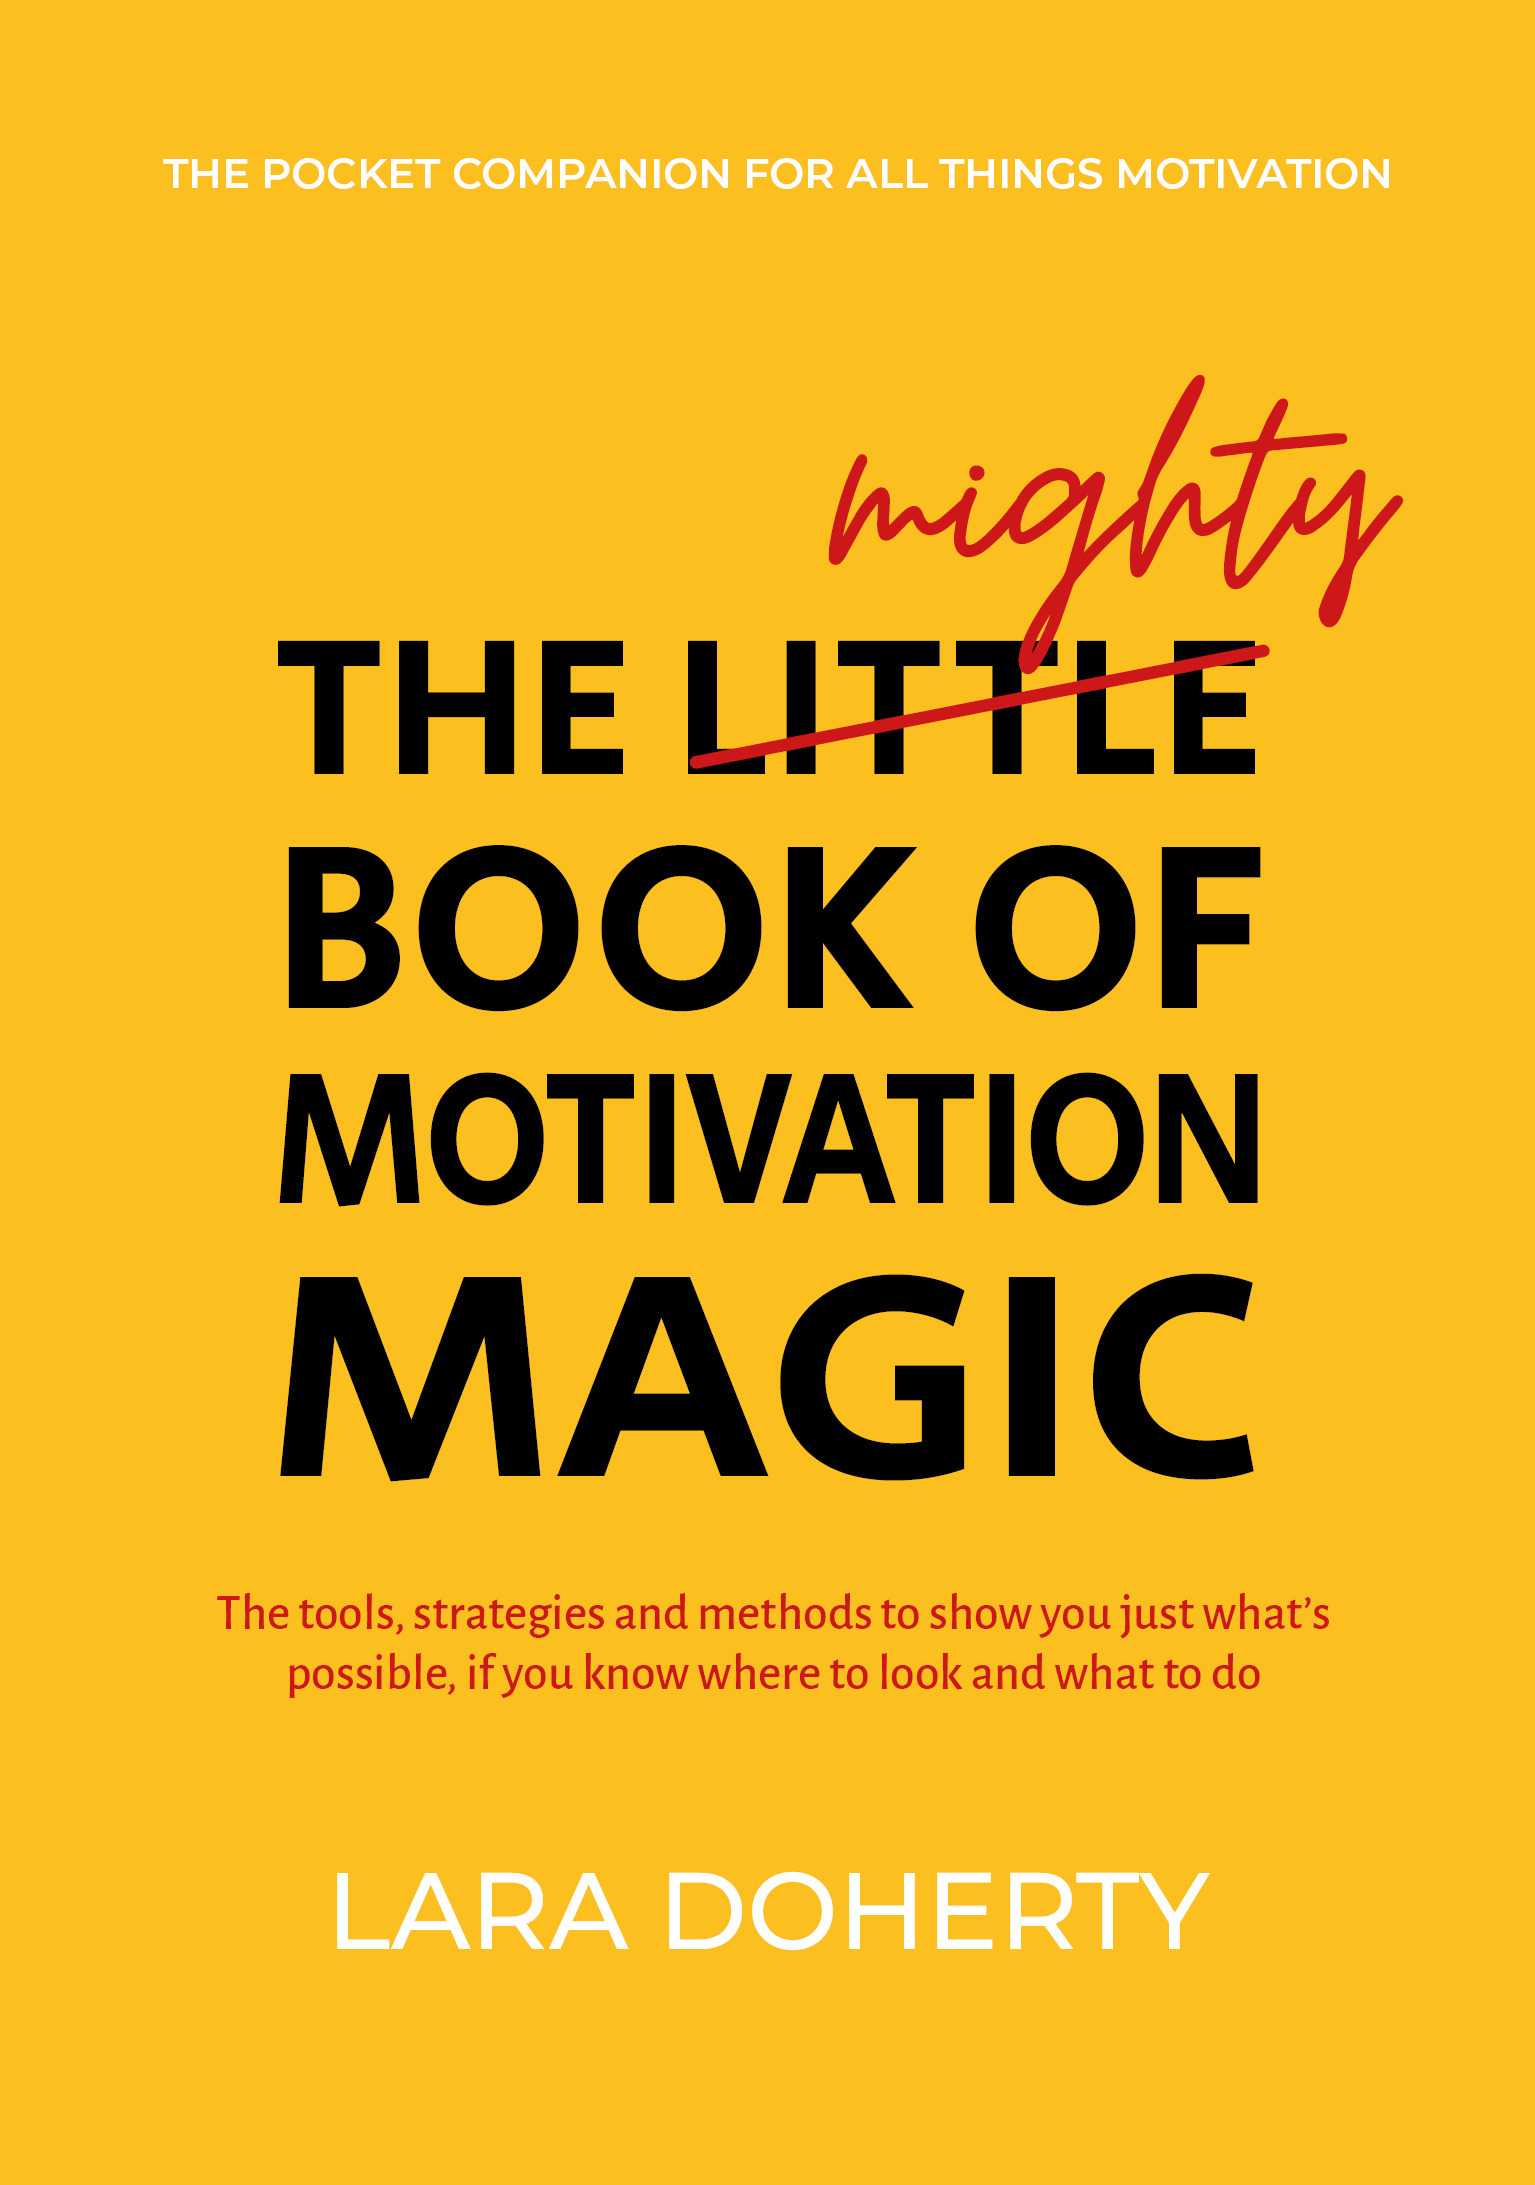 The Little Mighty Book of Motivation Magic - Lara Doherty